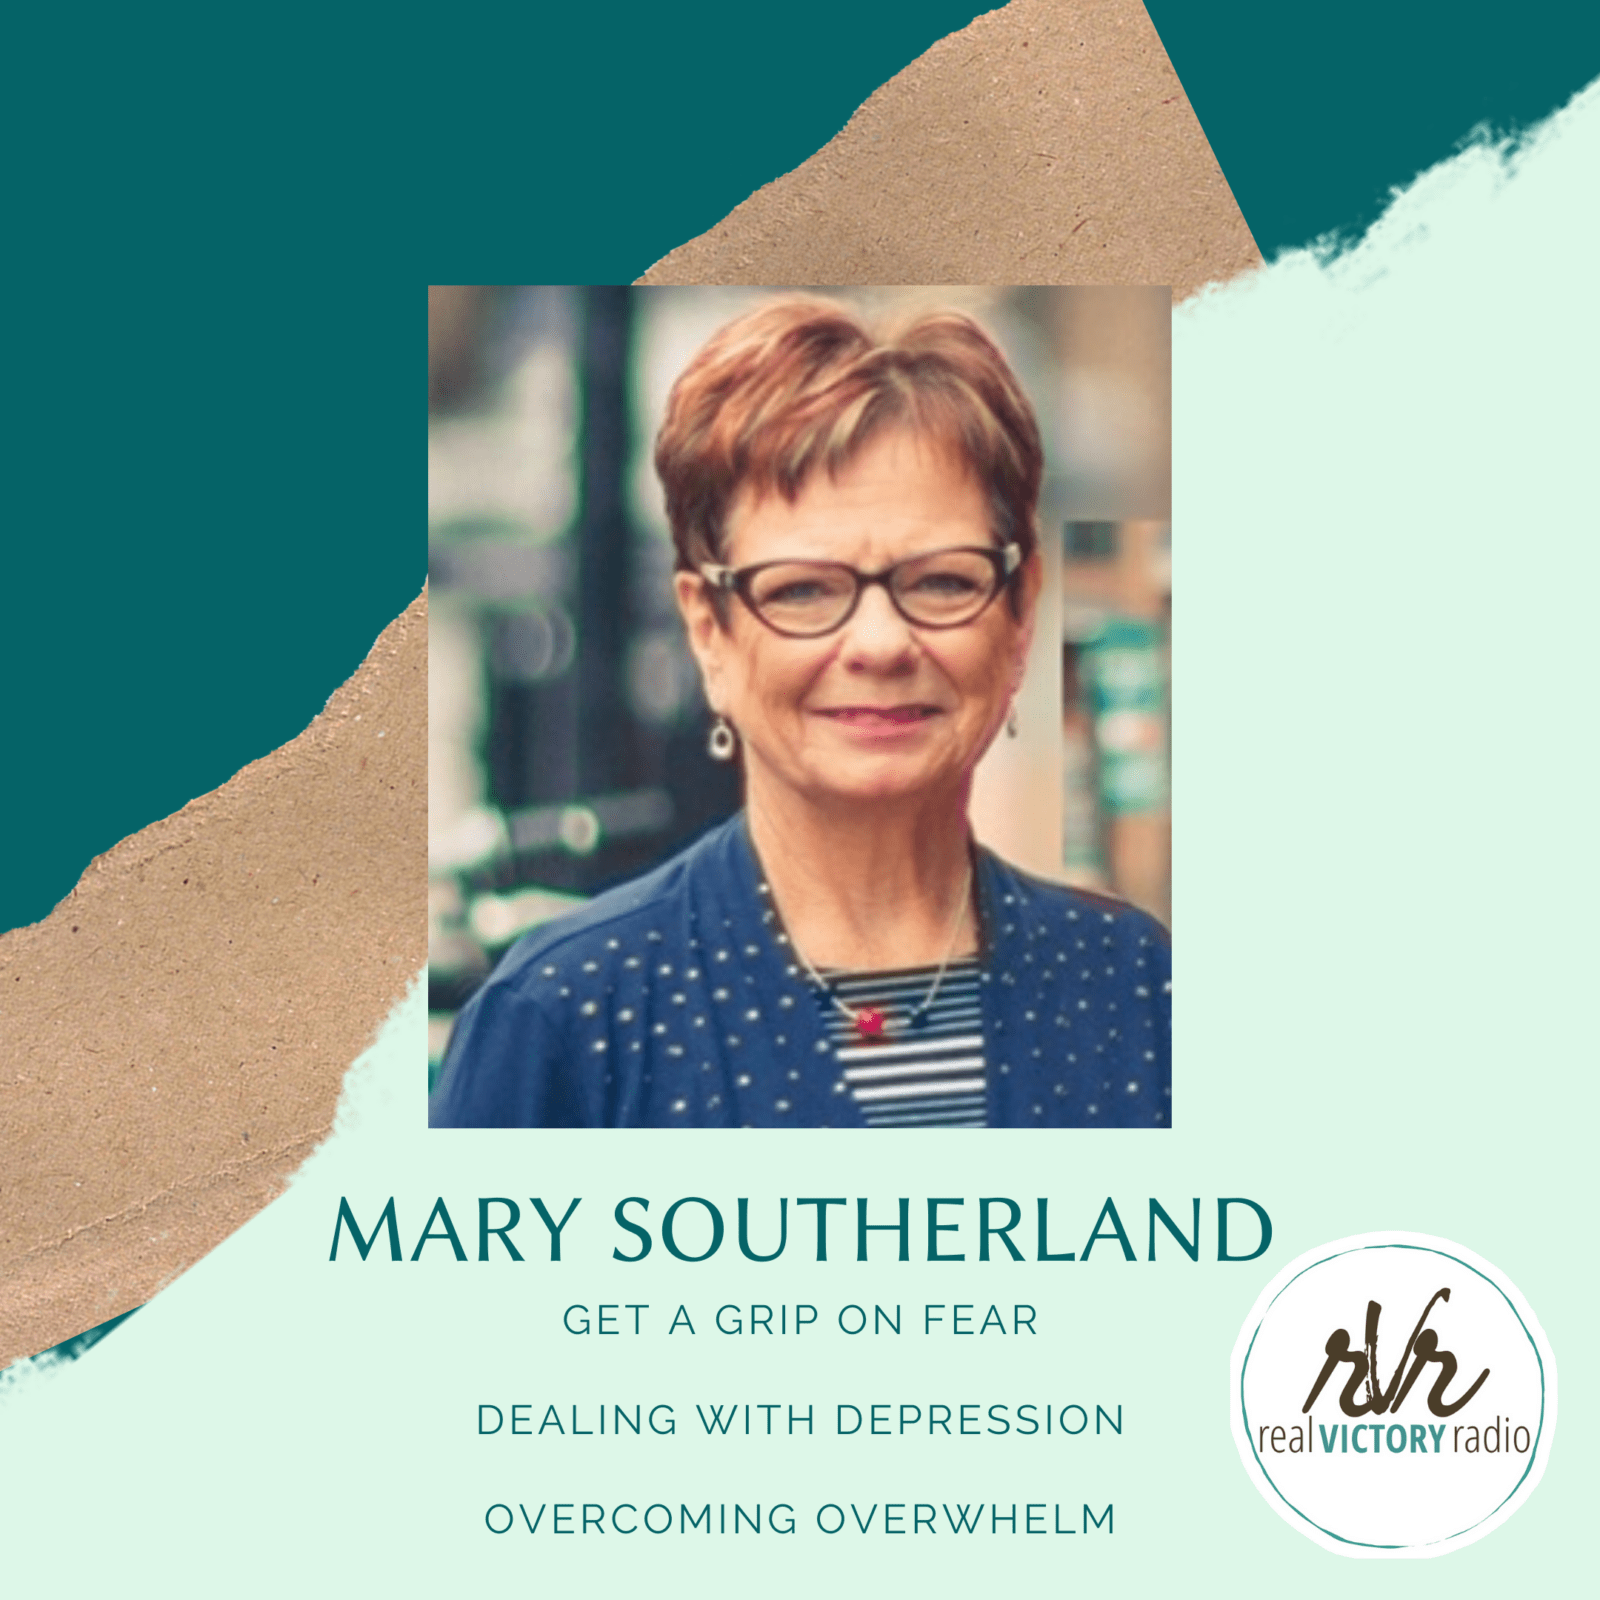 mary southerland on real victory radio